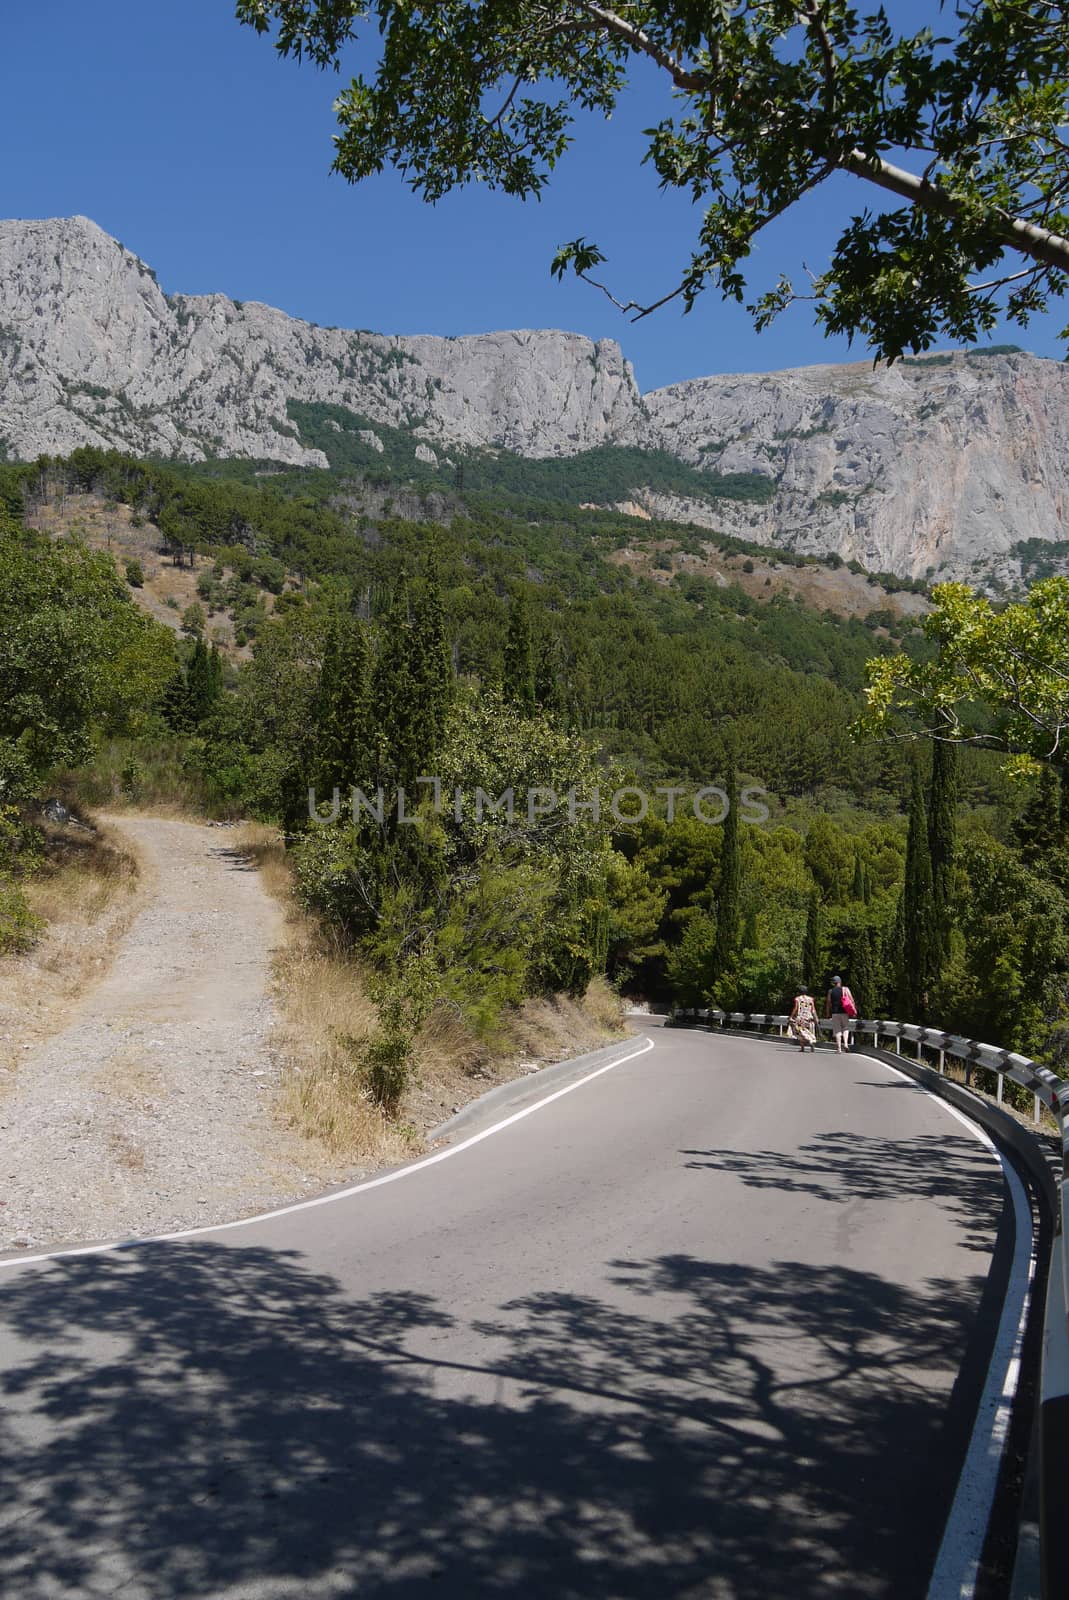 A steep winding road against the backdrop of green trees and high mountains